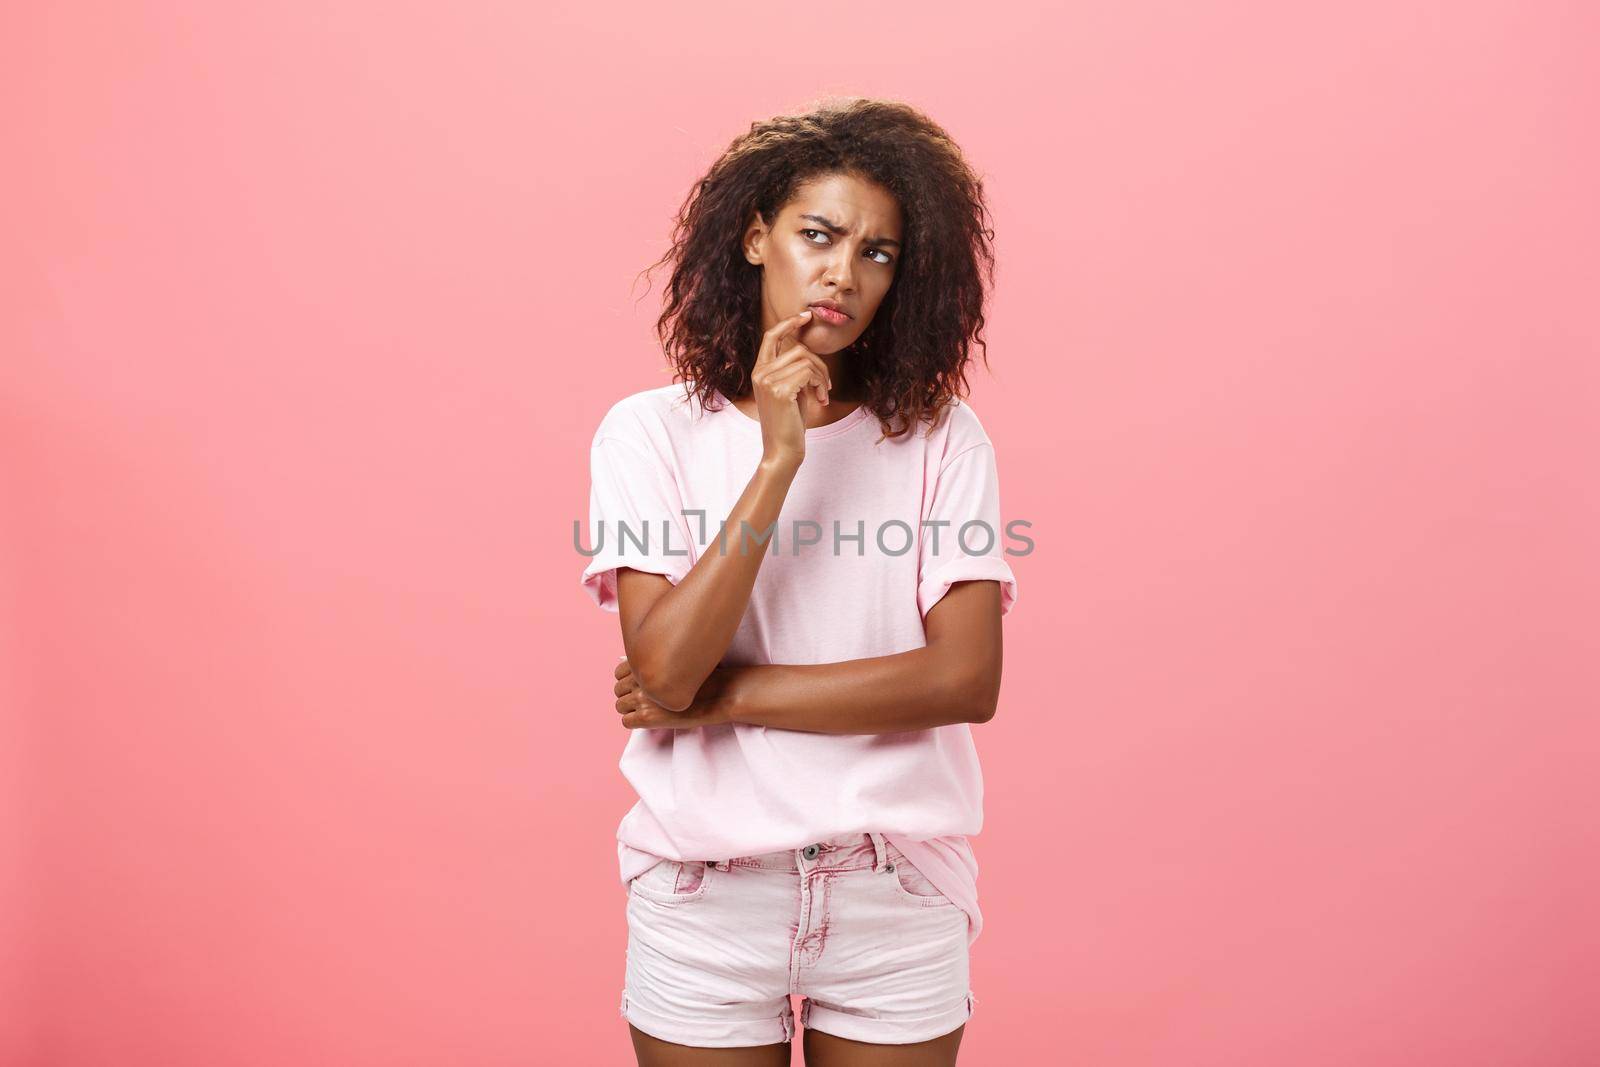 Suspicious displeased dark-skinned young curly-haired woman in trendy t-shirt and shorts saying hmm touching chin with finger frowning and staring left doubtful and unsure having concern. Emotions concept